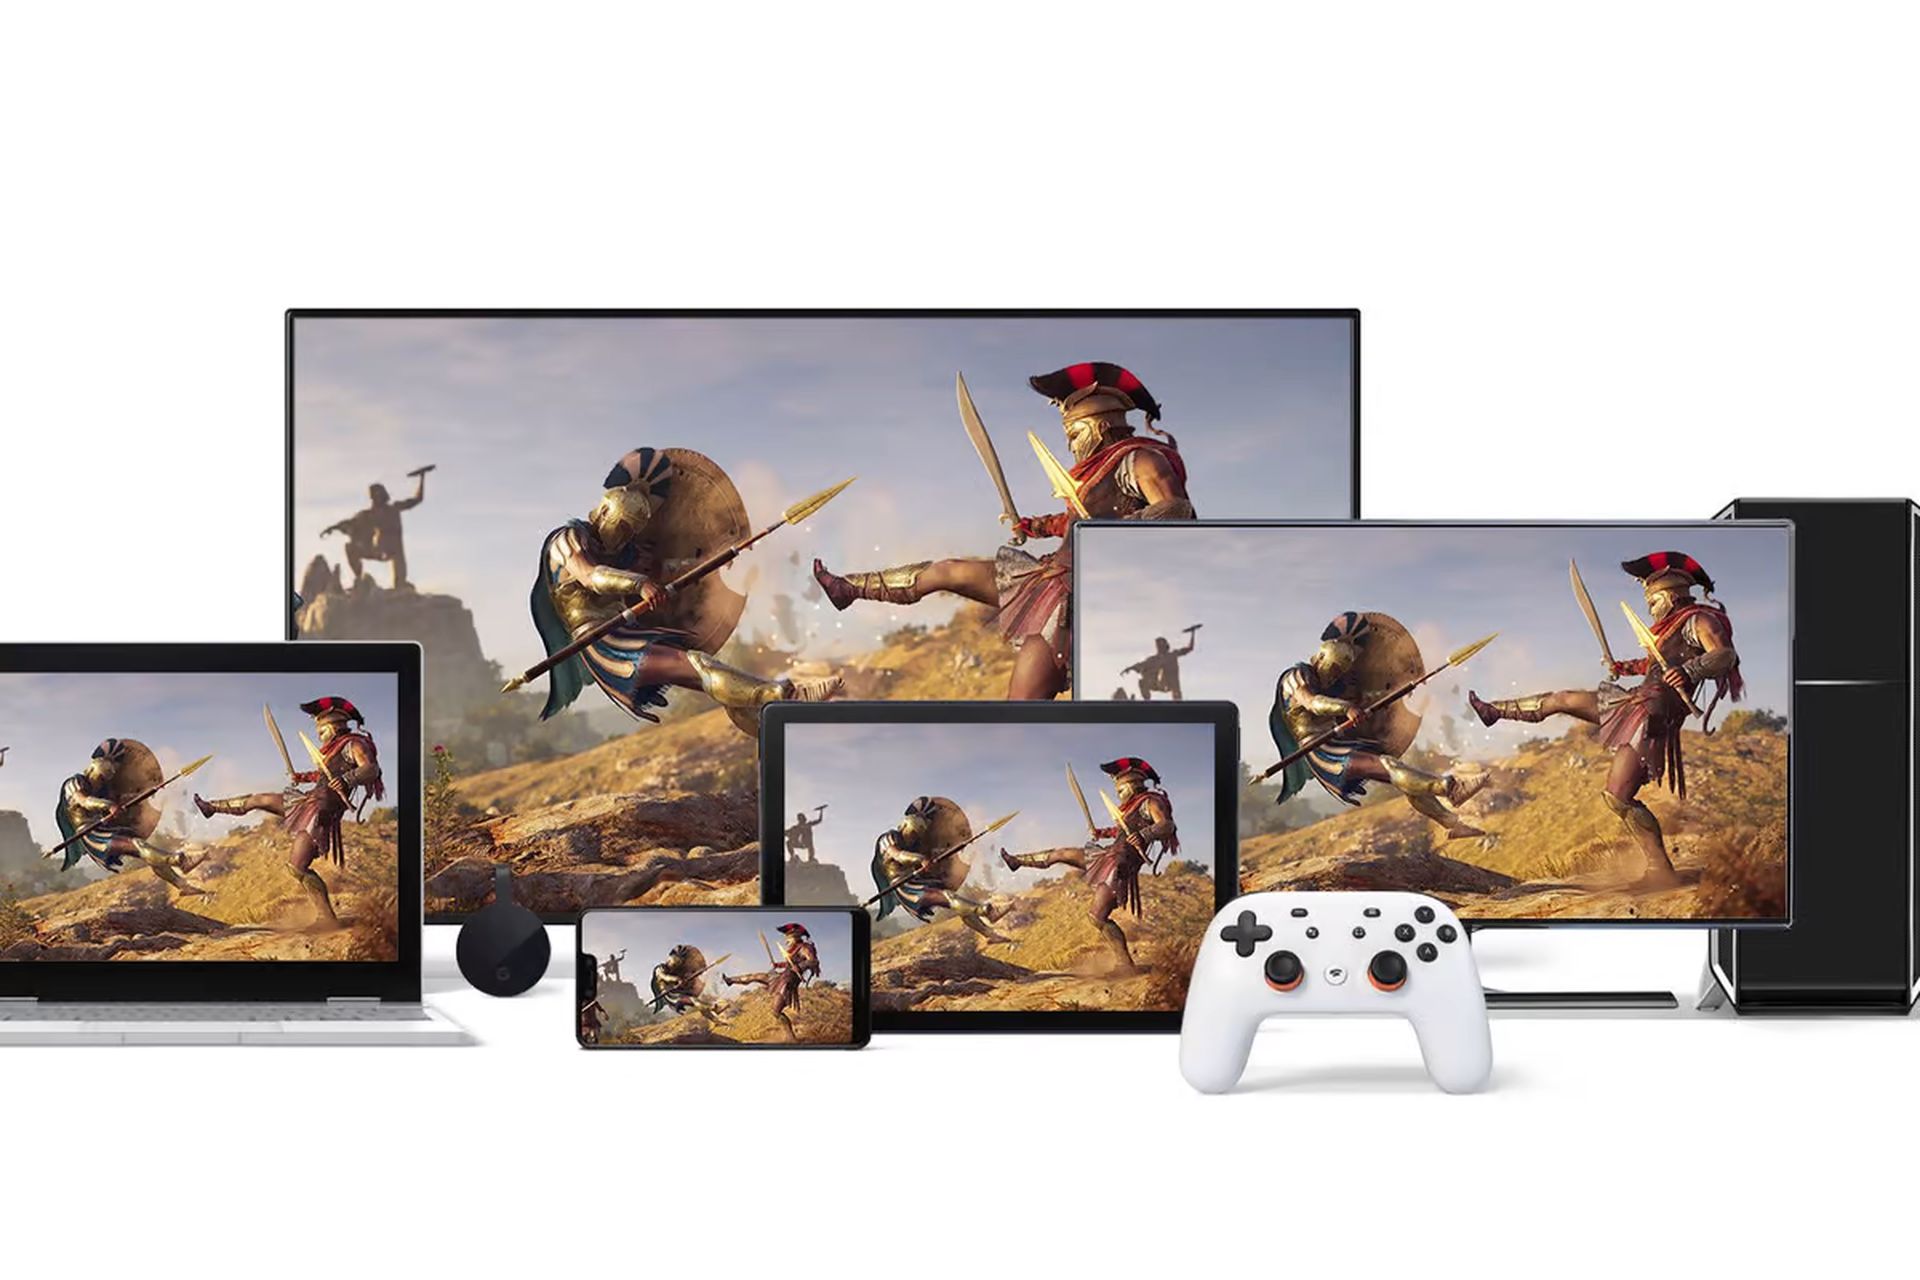 While companies like Amazon are still trying their luck in the cloud gaming service, Google Stadia shutting down because "it hasn't gained the traction with...